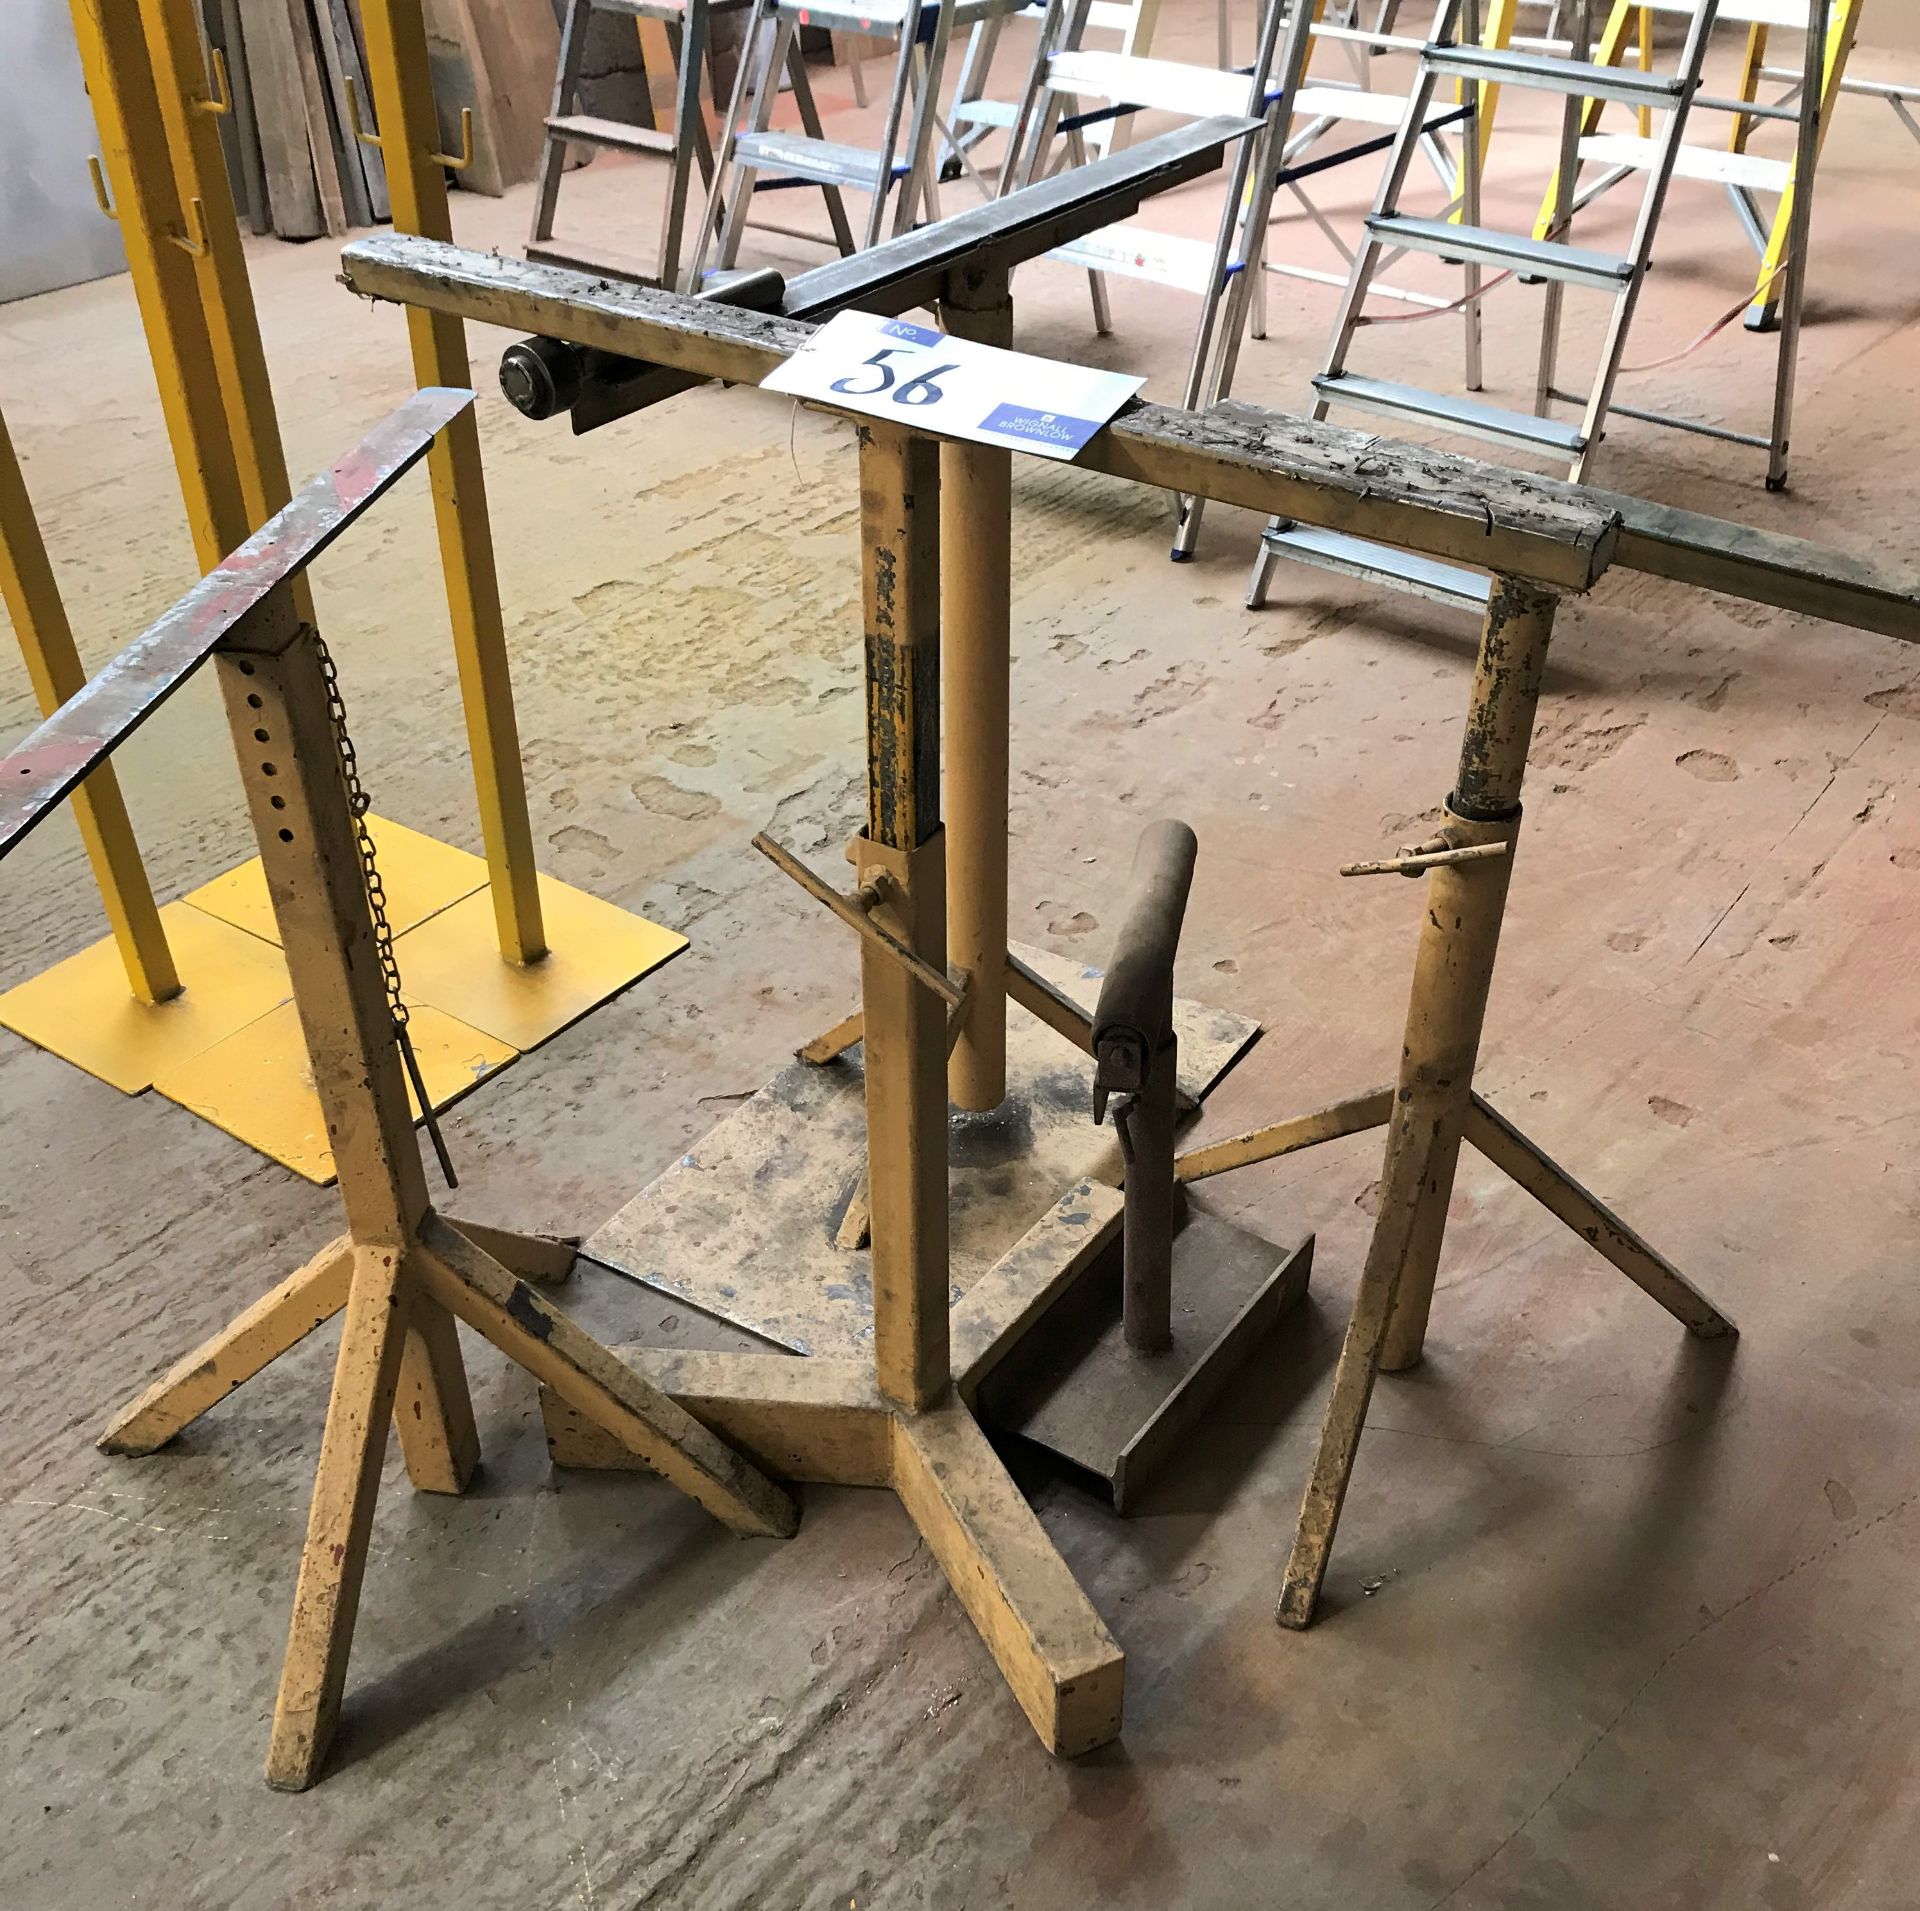 4 Adjustable Height Trestle Stands with Adjustable Height Roller Stand.